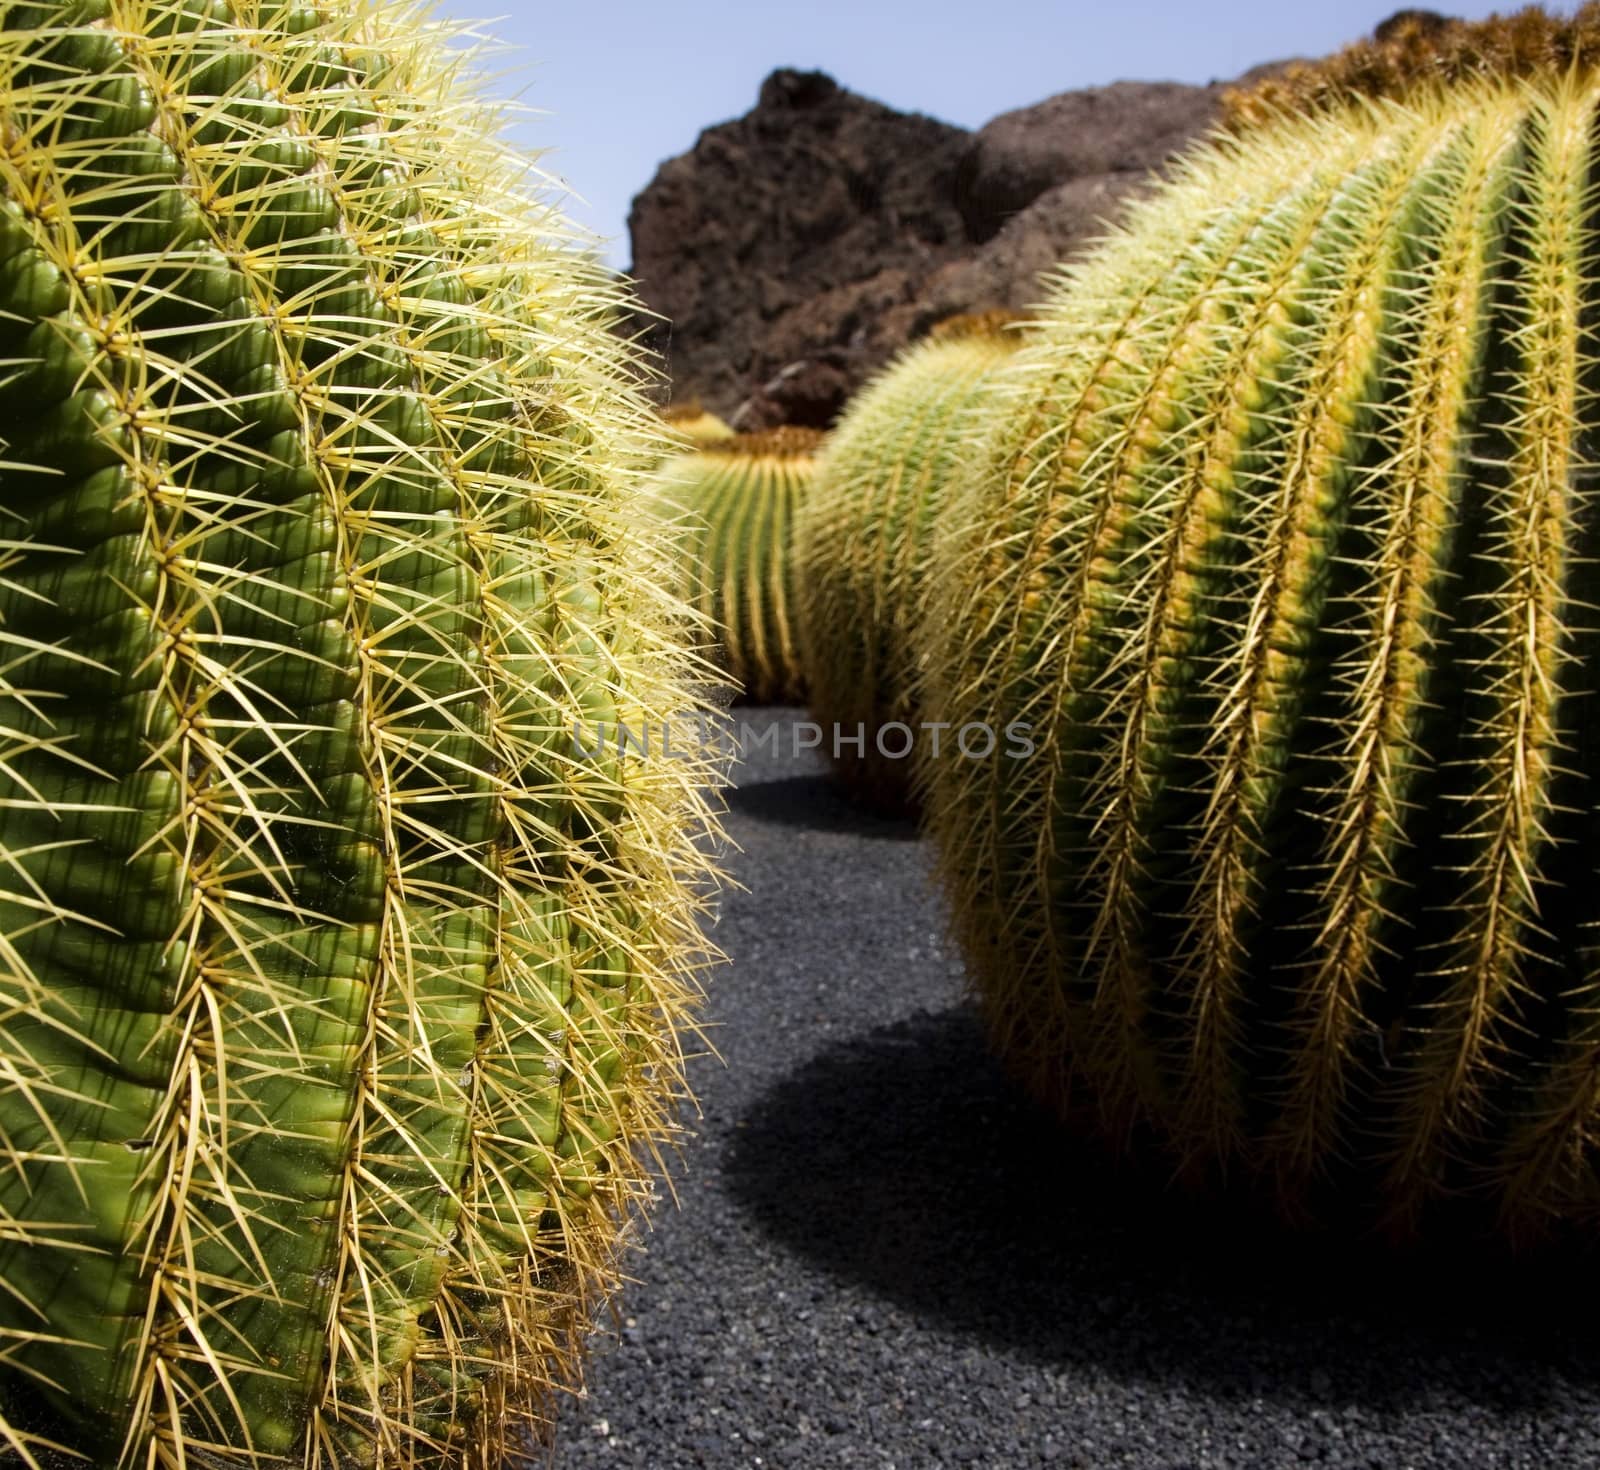 Cactus scenary with spherical cactus including black land and blue sky. by emadrazo